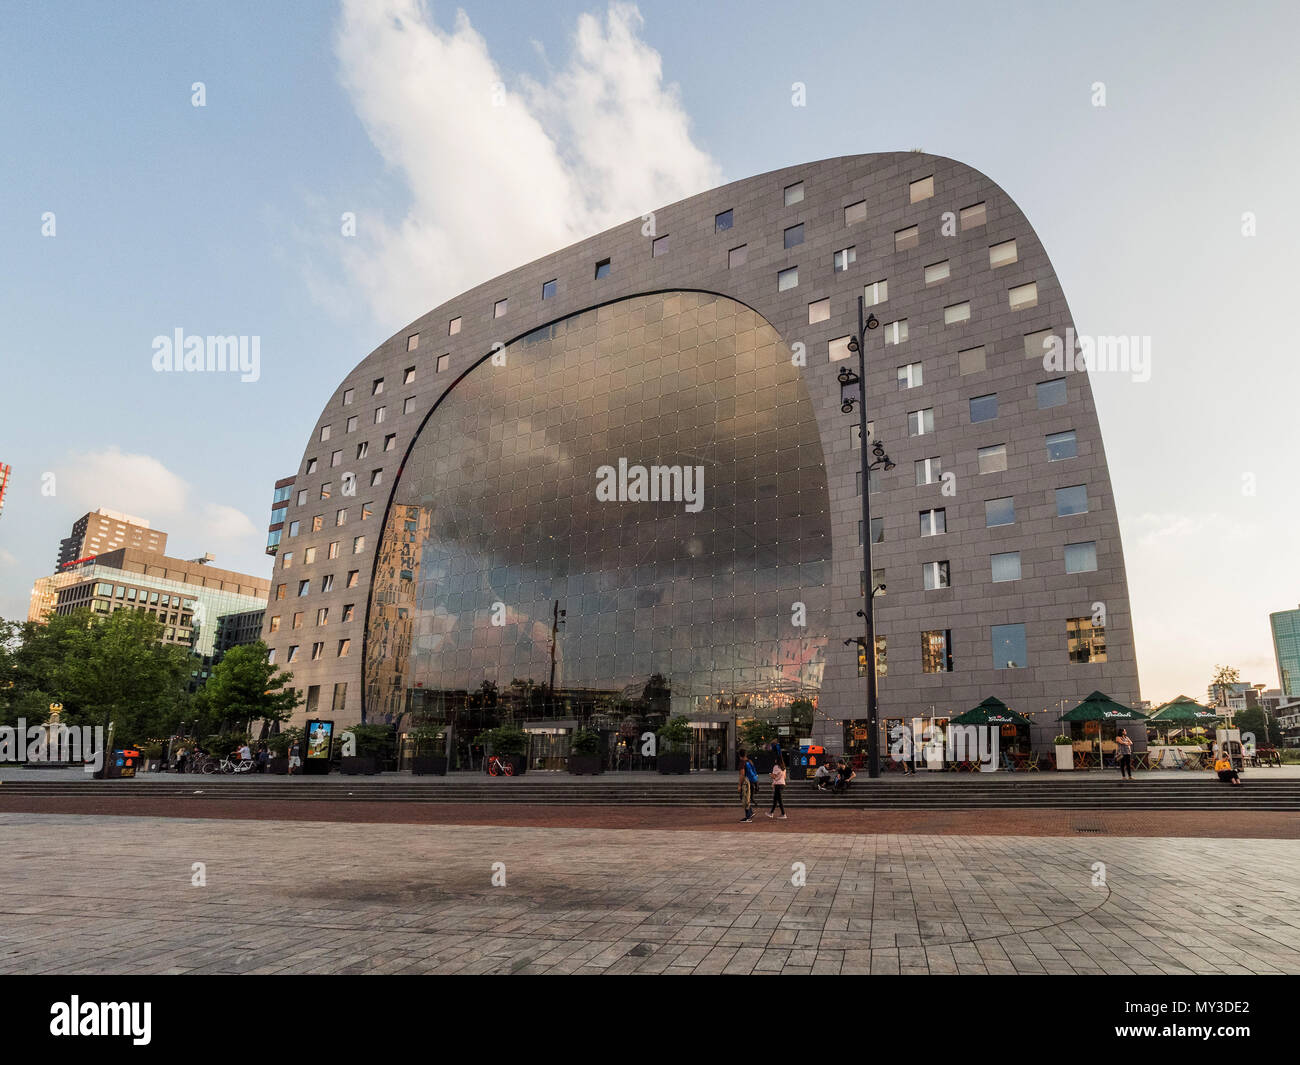 ROTTERDAM, NETHERLANDS - MAY 31, 2018: Exterior view of the Market Hall a residential and office building. Market Hall in the Blaak district of Rotter Stock Photo